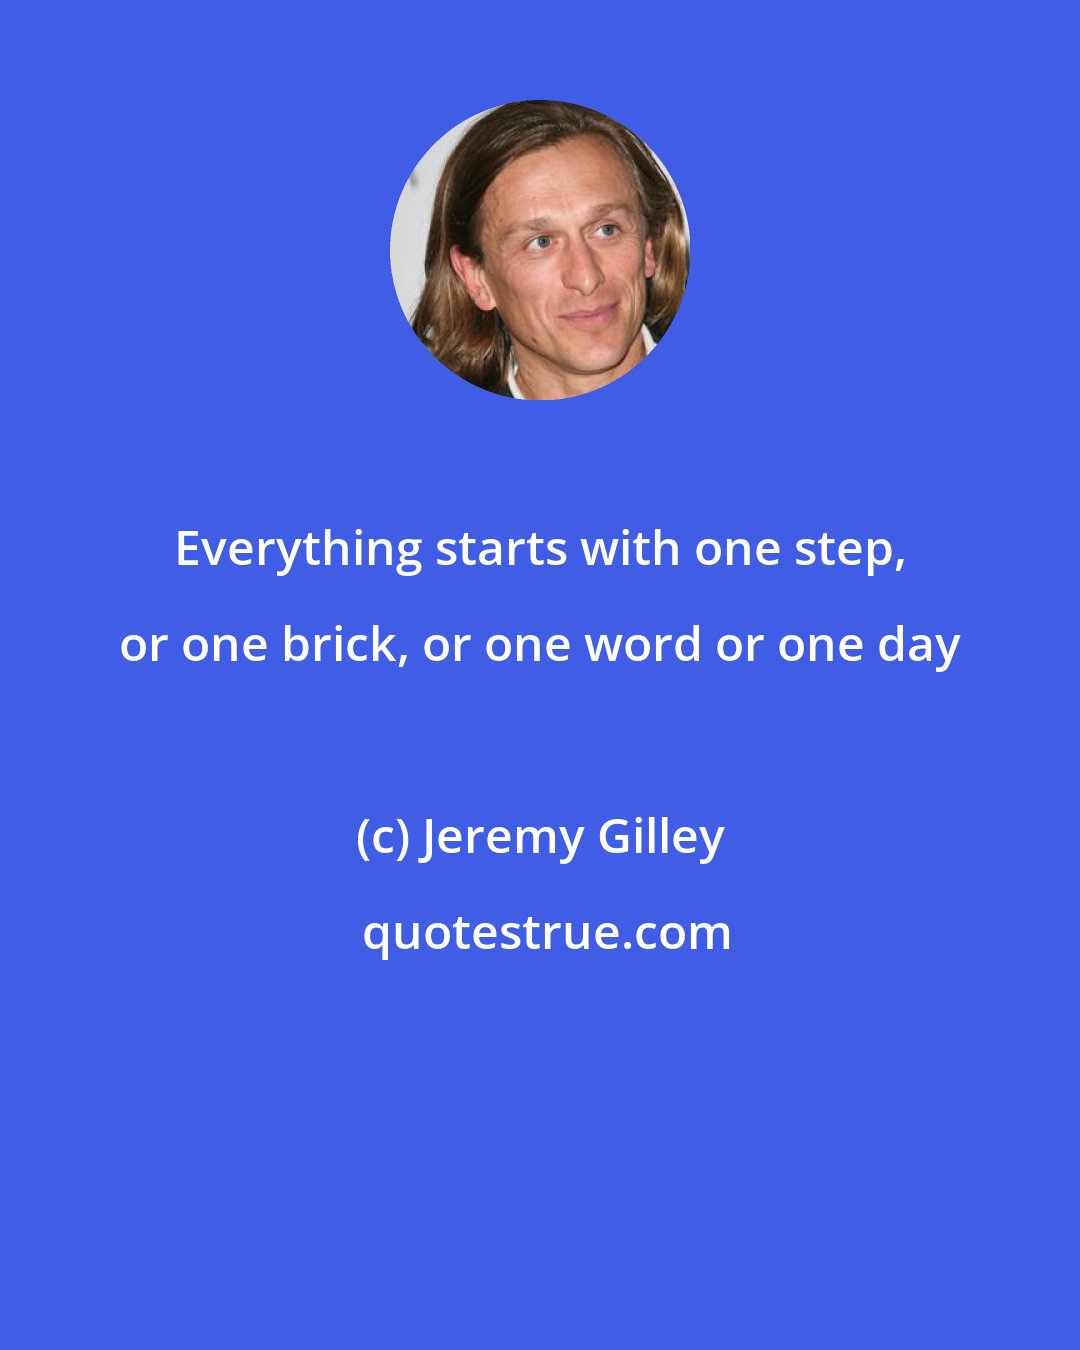 Jeremy Gilley: Everything starts with one step, or one brick, or one word or one day